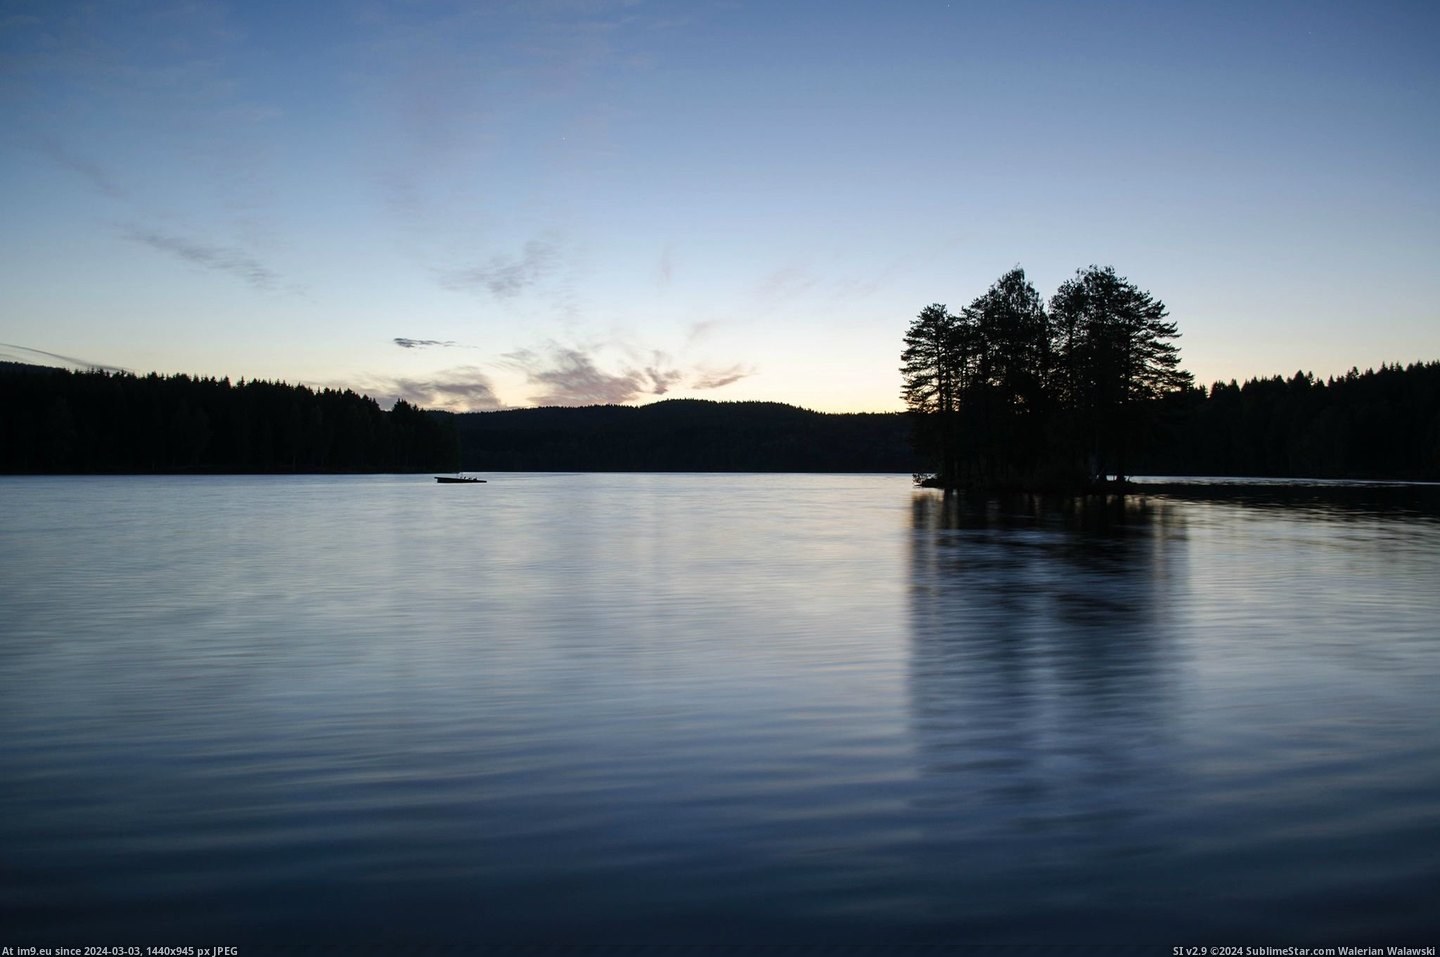 #Lake #Norway #Sognsvann #Oslo #2048x1356 [Earthporn] Sognsvann lake, Oslo, Norway, at 02:00 AM [2048x1356] [OC] Pic. (Image of album My r/EARTHPORN favs))